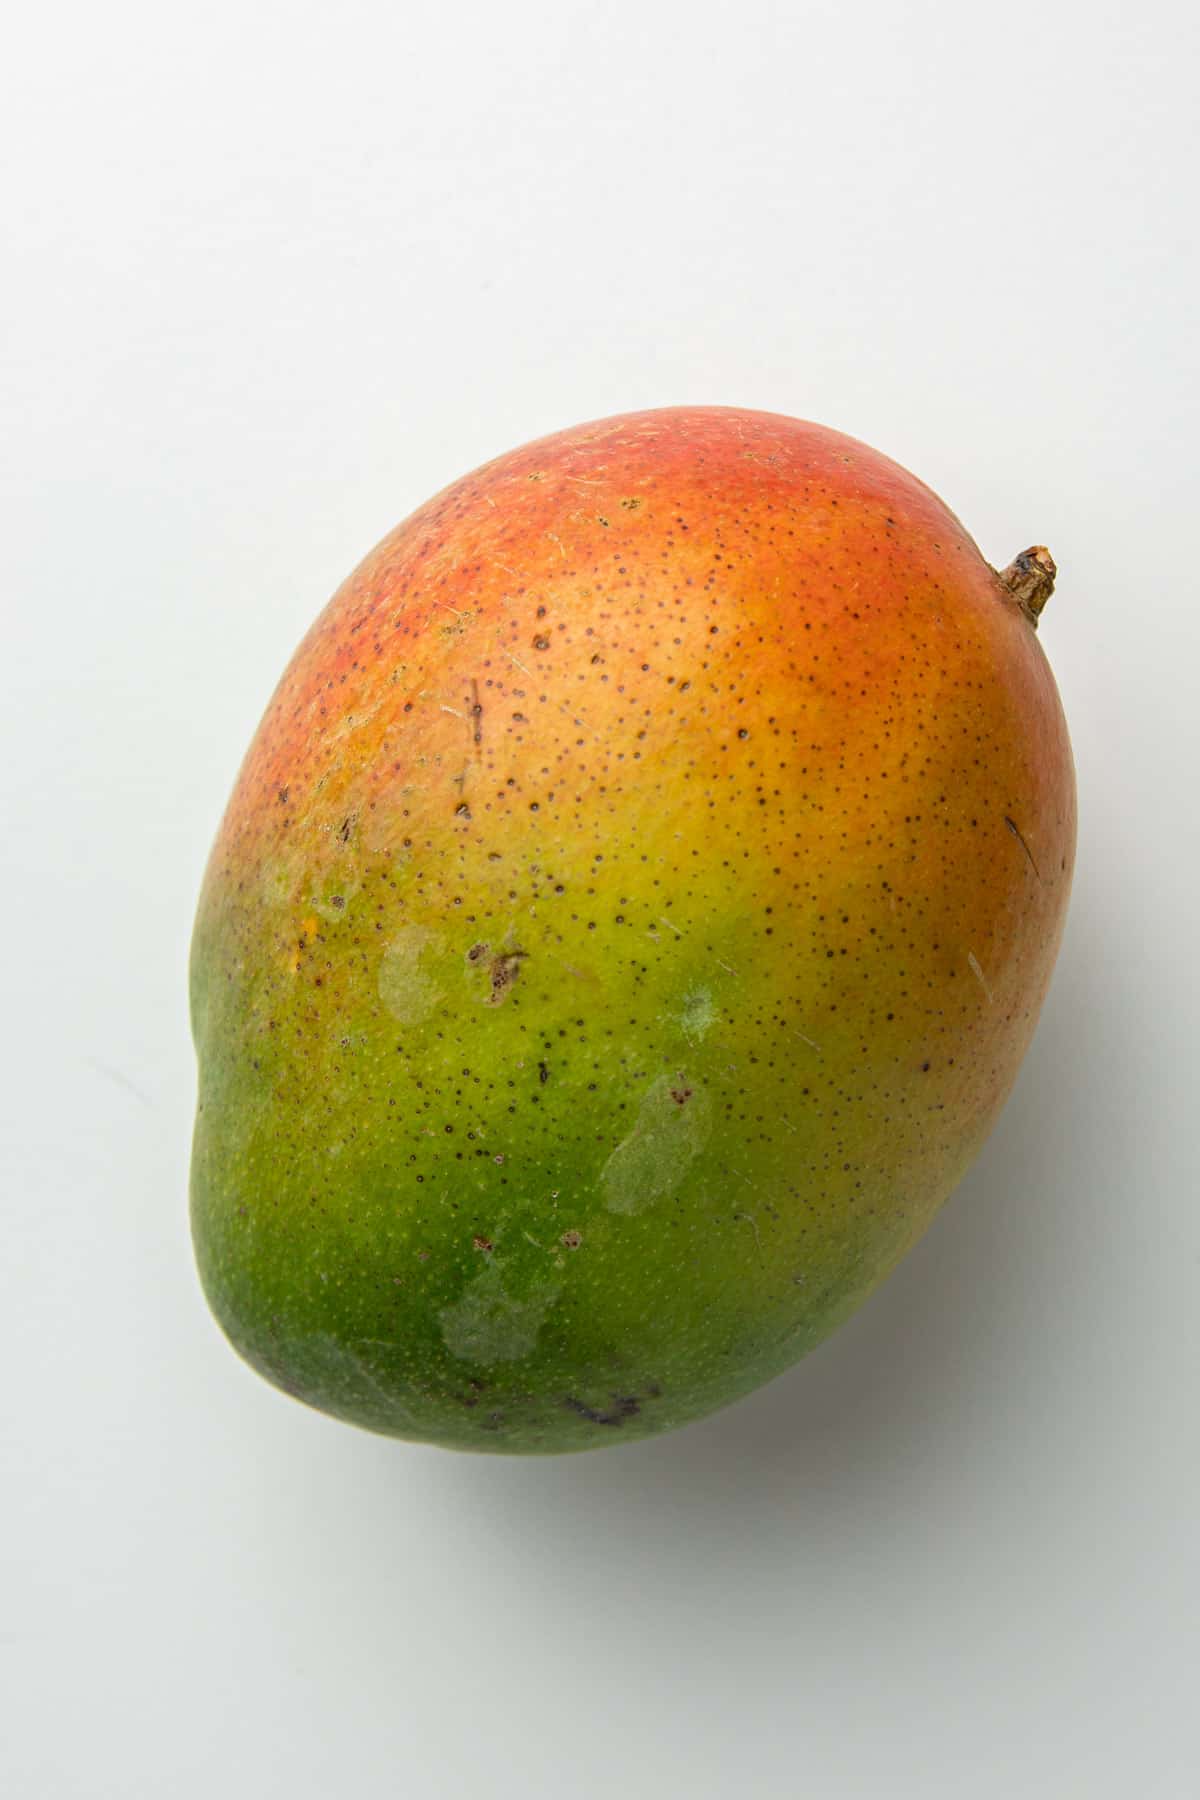 Unripe green mango on a white surface.